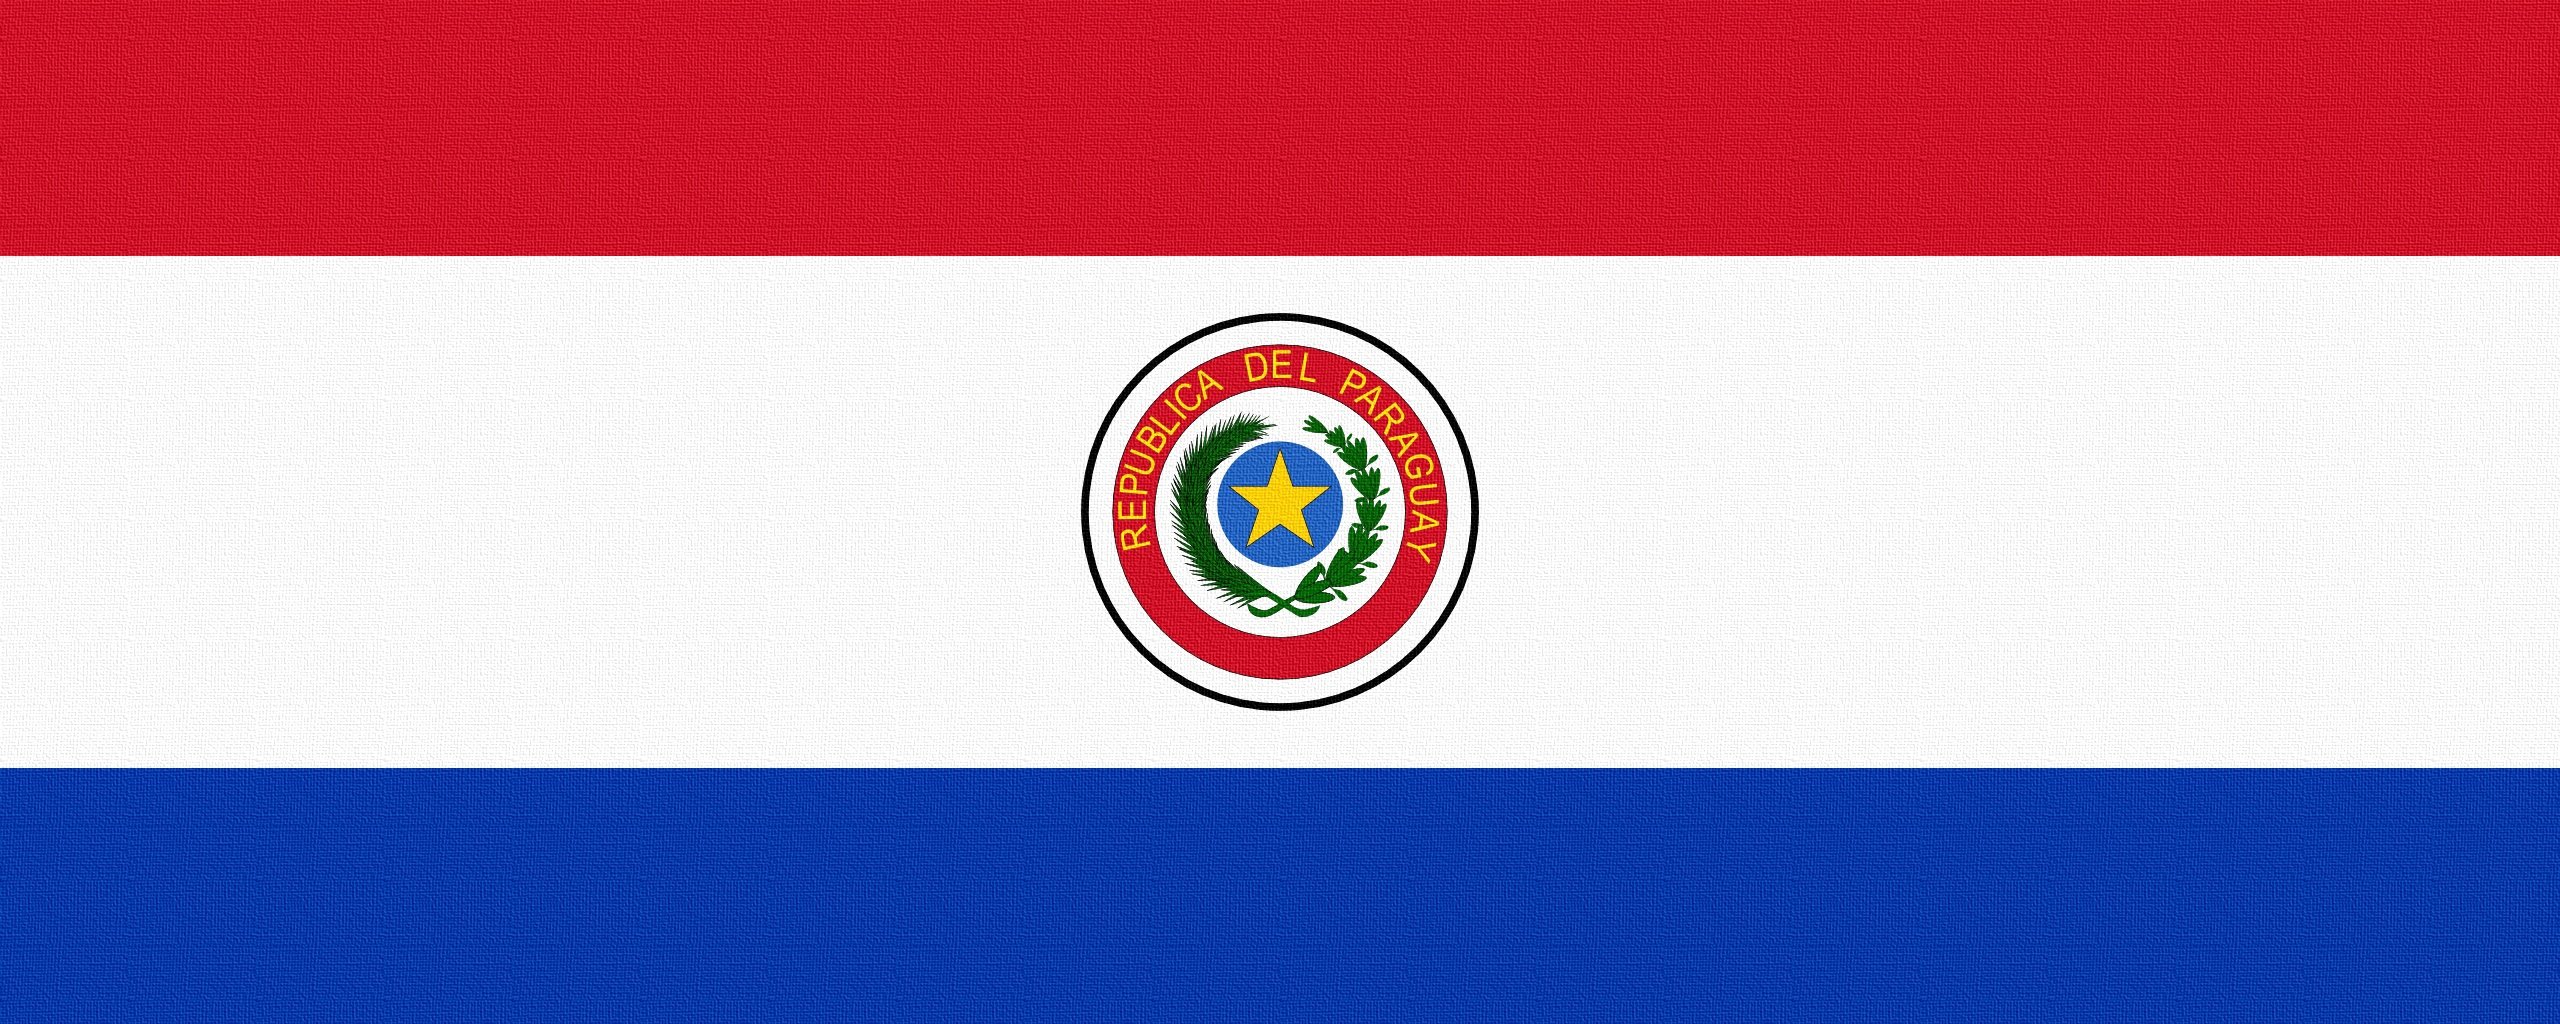 Download wallpaper 2560x1024 paraguay, flag, line ultrawide monitor